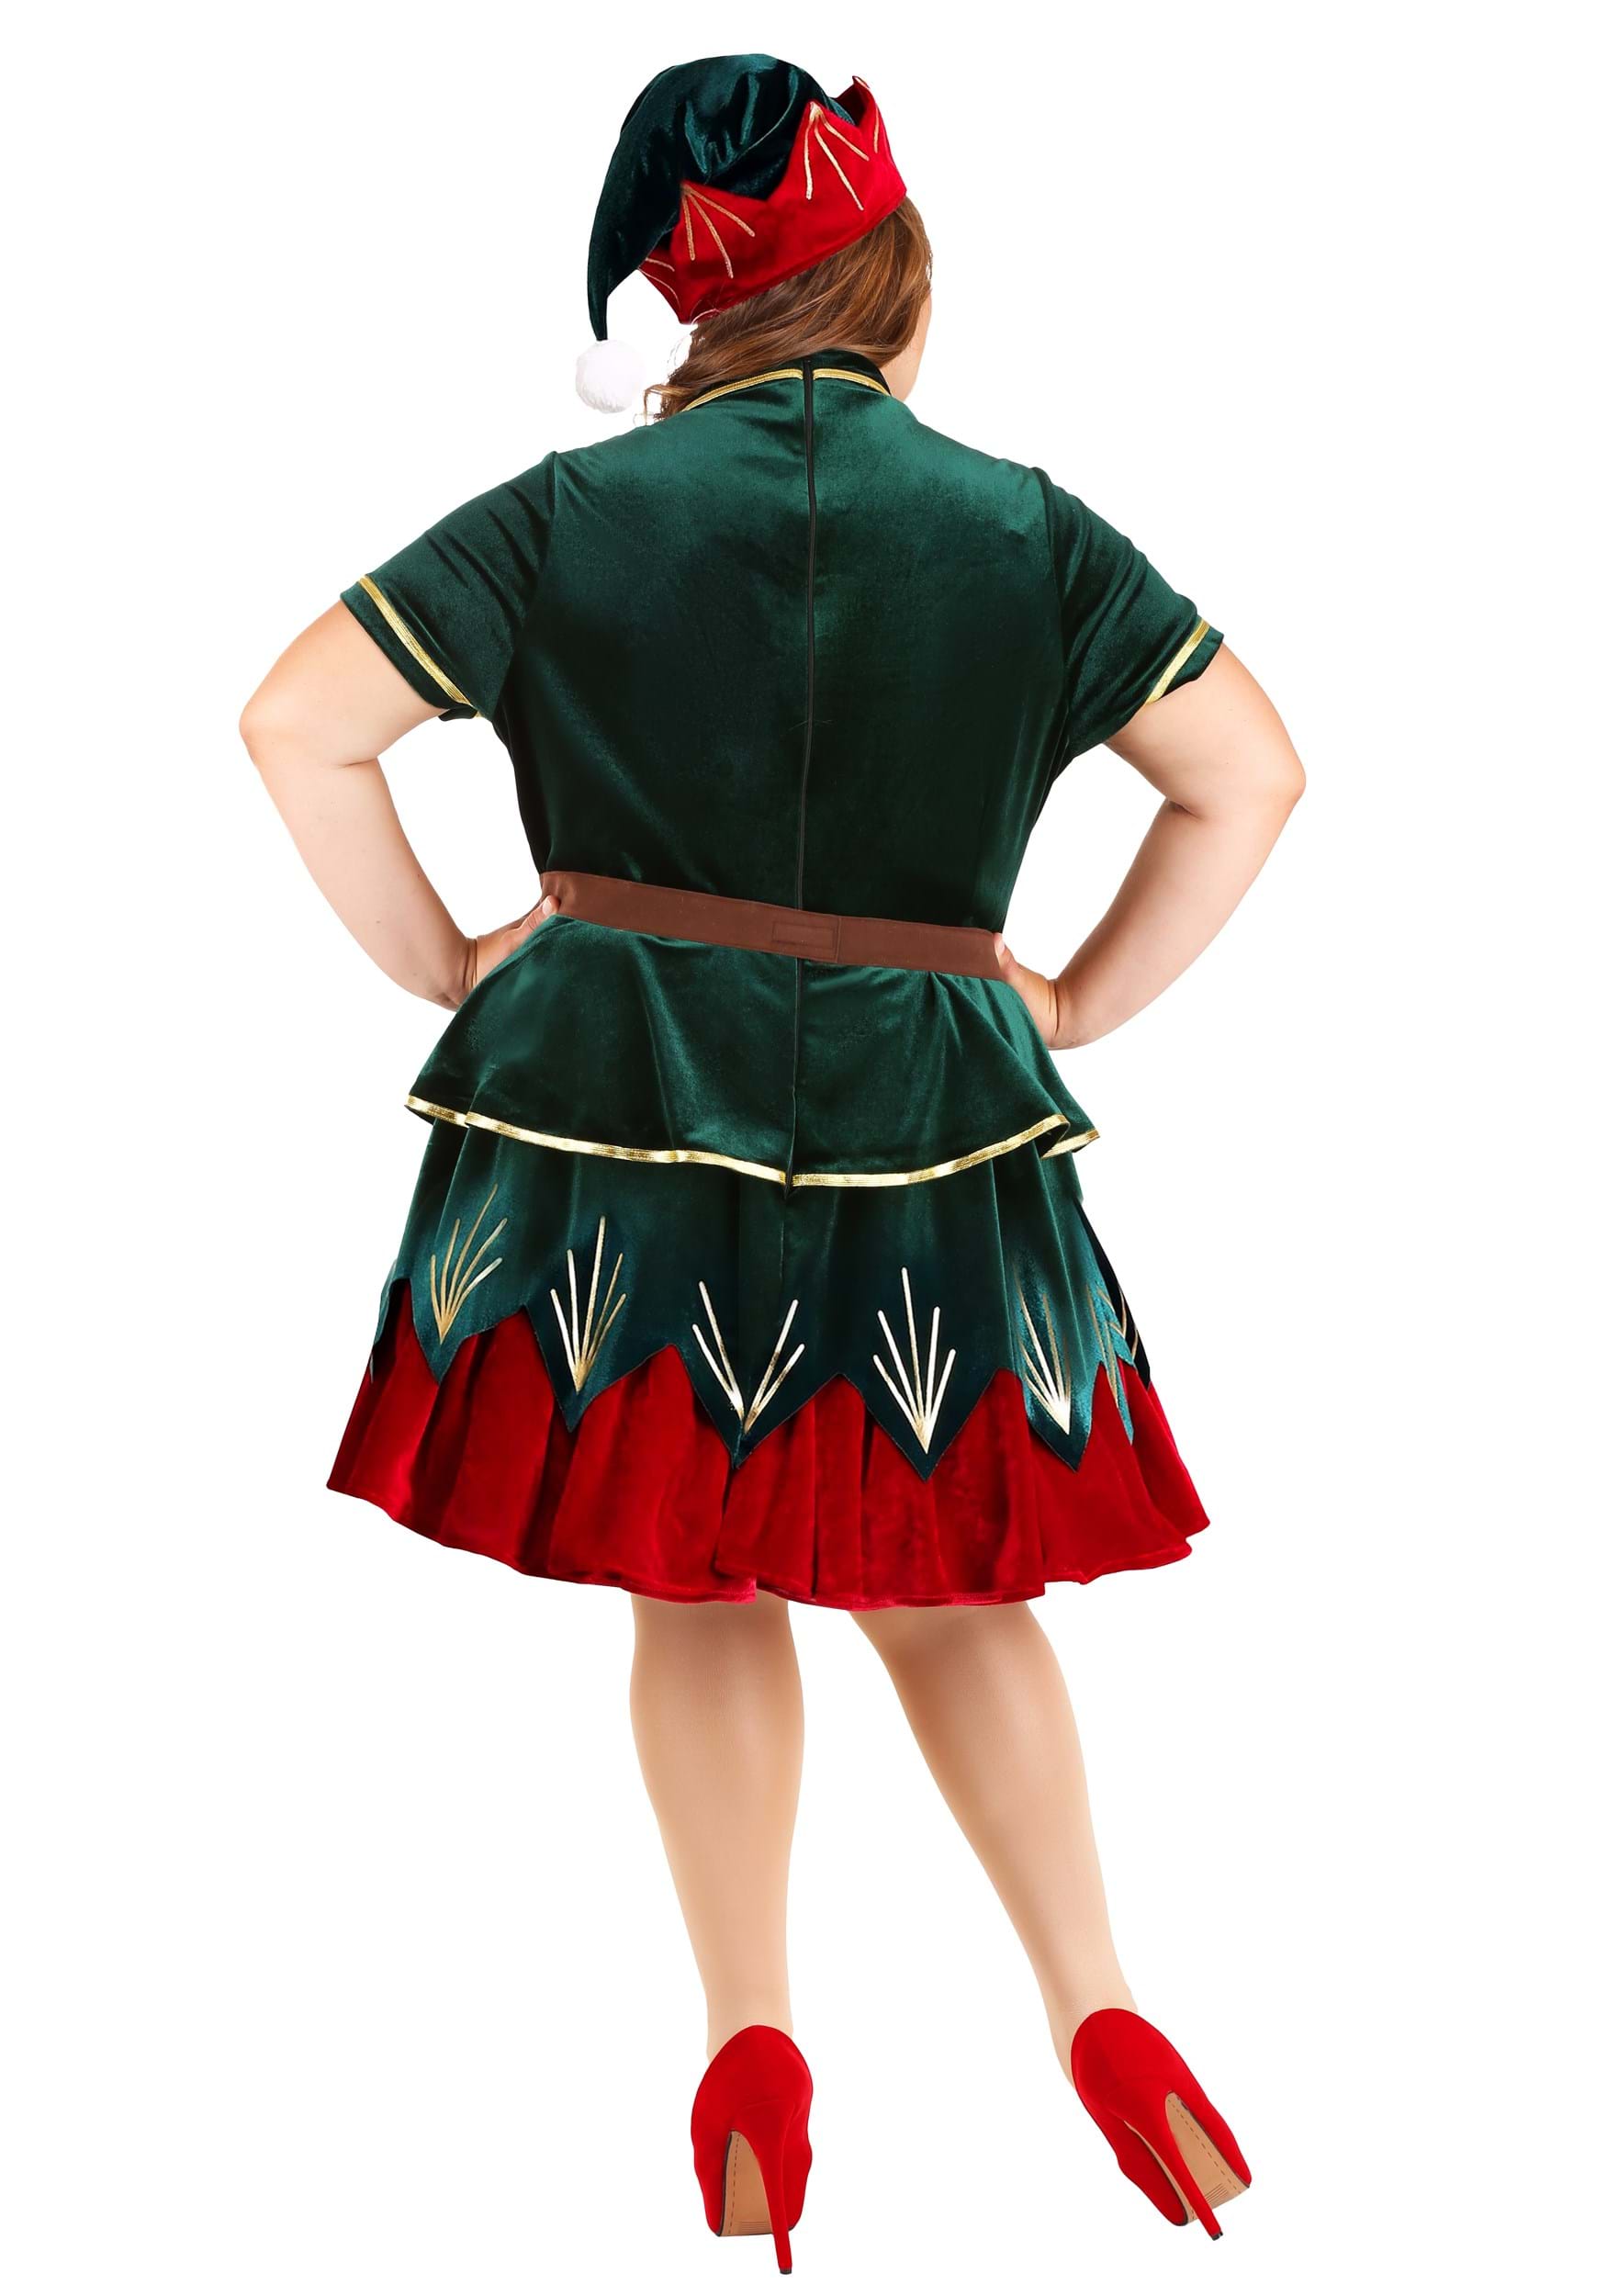 Plus Size Deluxe Holiday Elf Costume For Women